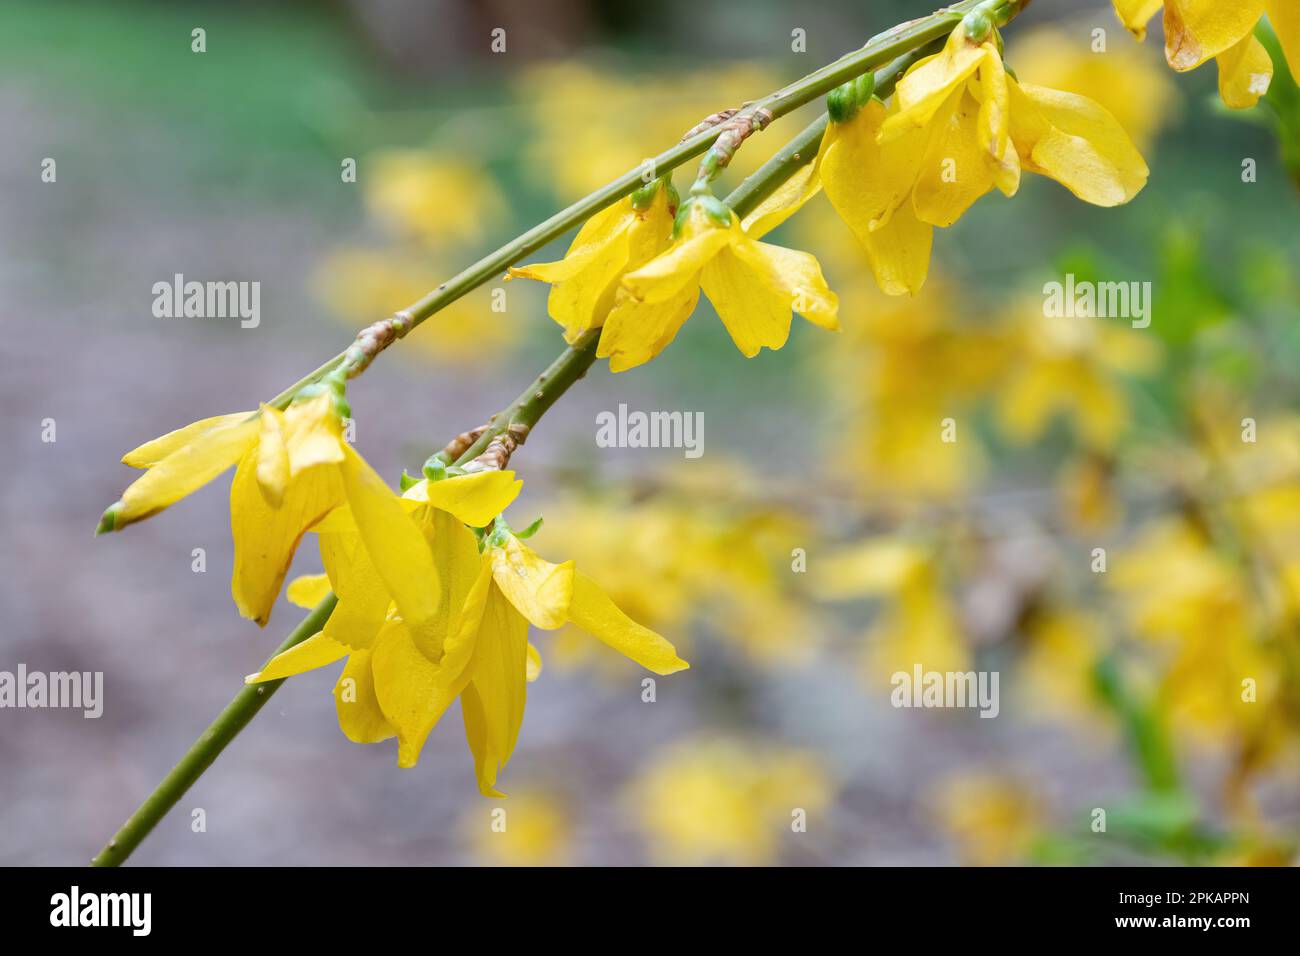 Deep yellow blooms or flowers of Forsythia x intermedia 'Lynwood' variety during spring or April, UK, a deciduous shrub Stock Photo